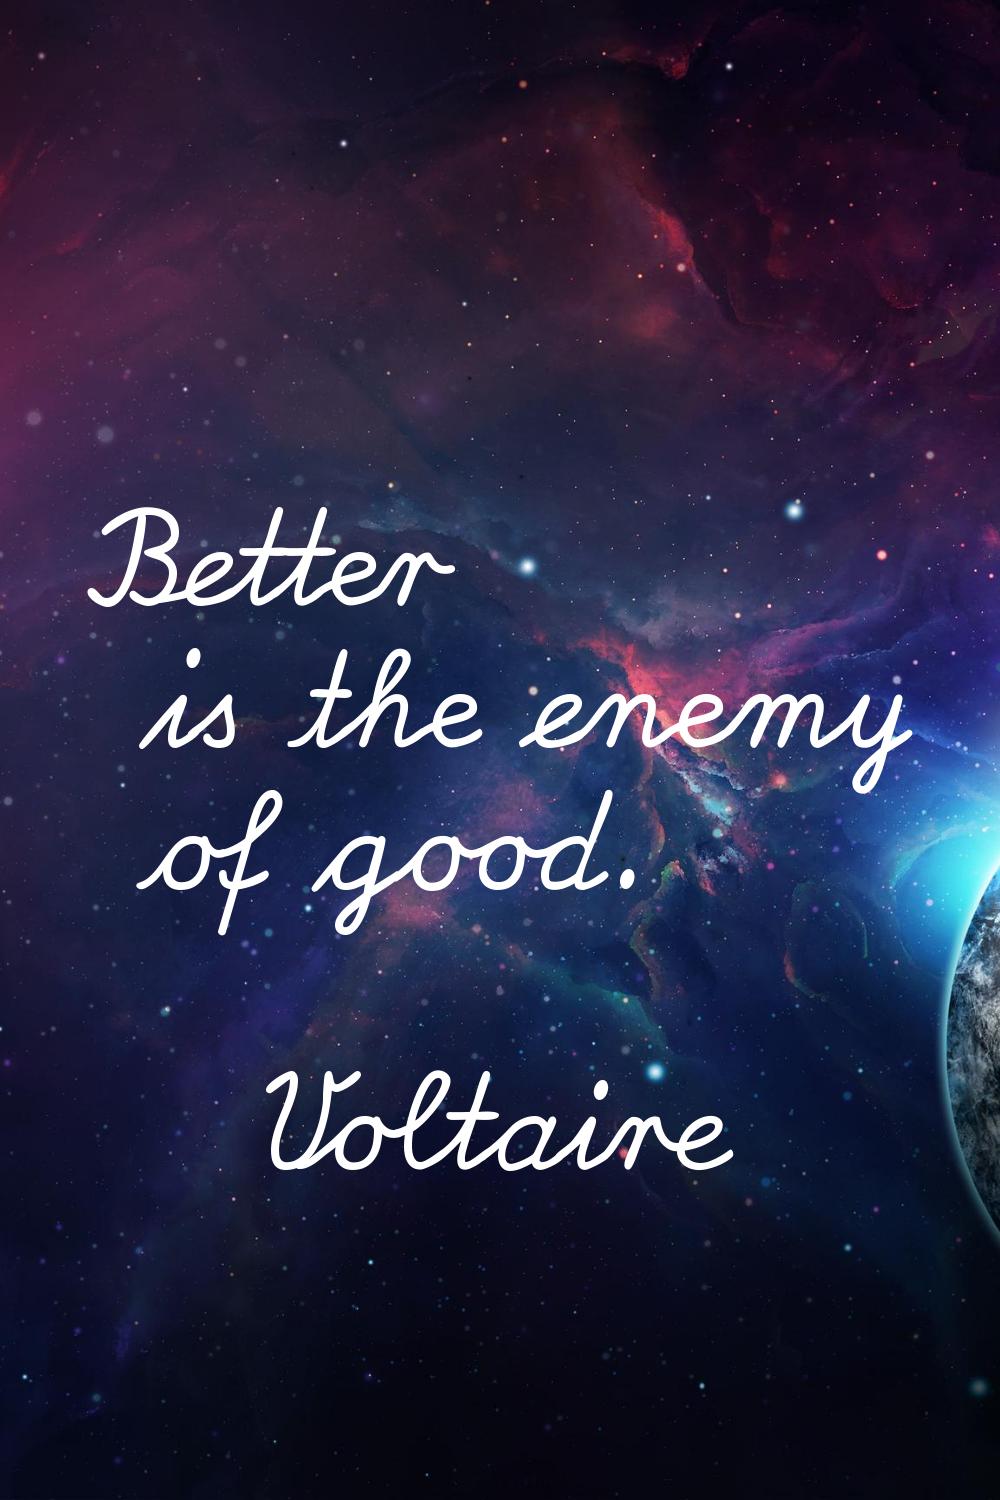 Better is the enemy of good.